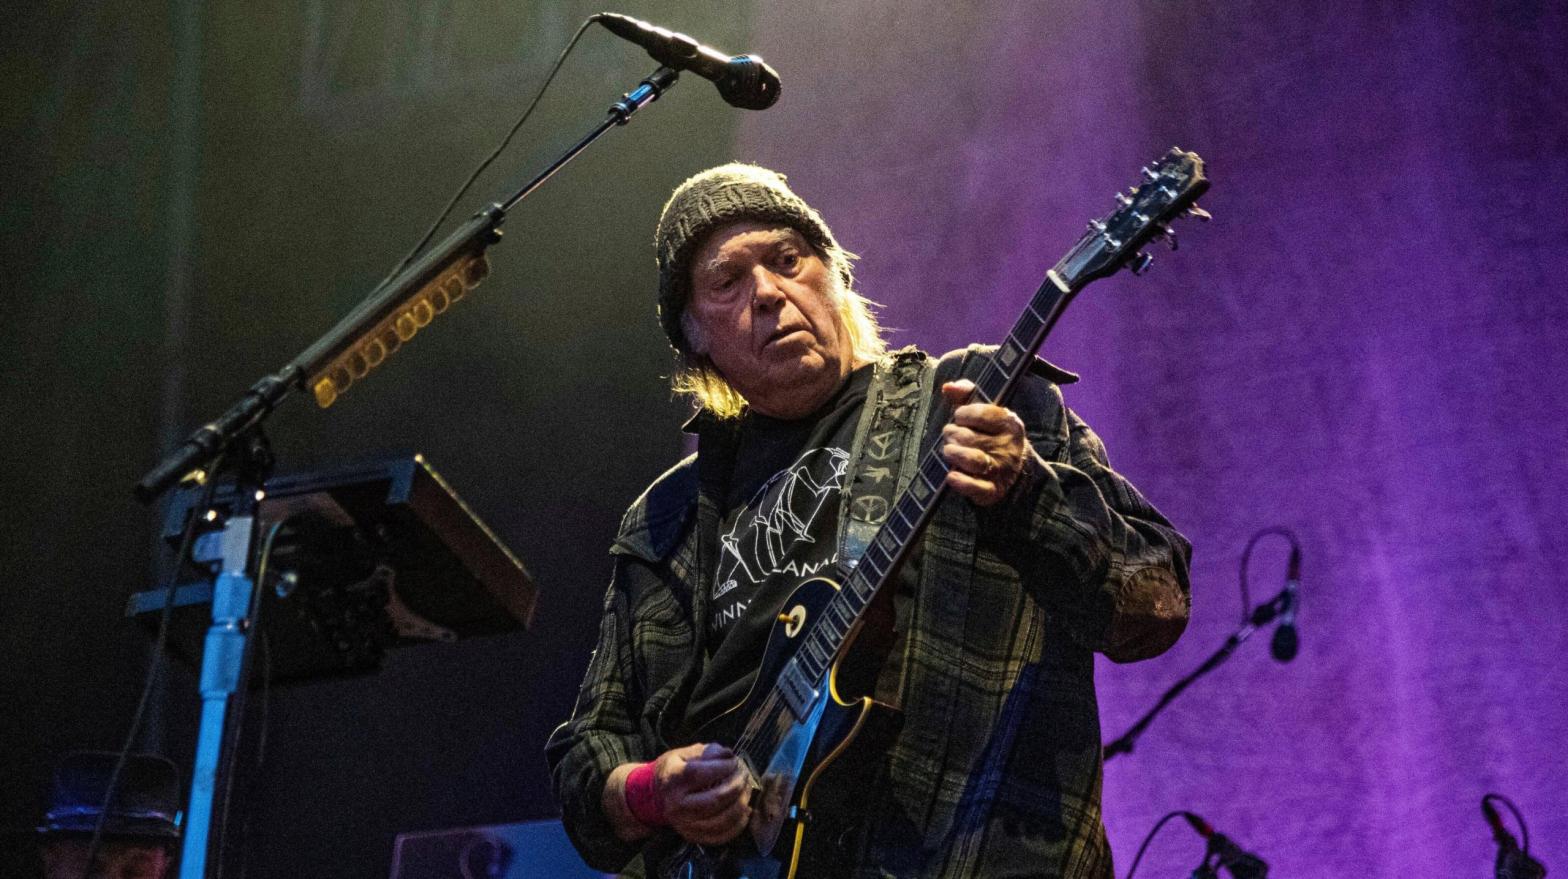 Neil Young performs at the BottleRock Napa Valley Music Festival at Napa Valley Expo in Napa, Calif., on May 25, 2019.  (Photo: Amy Harris, AP)